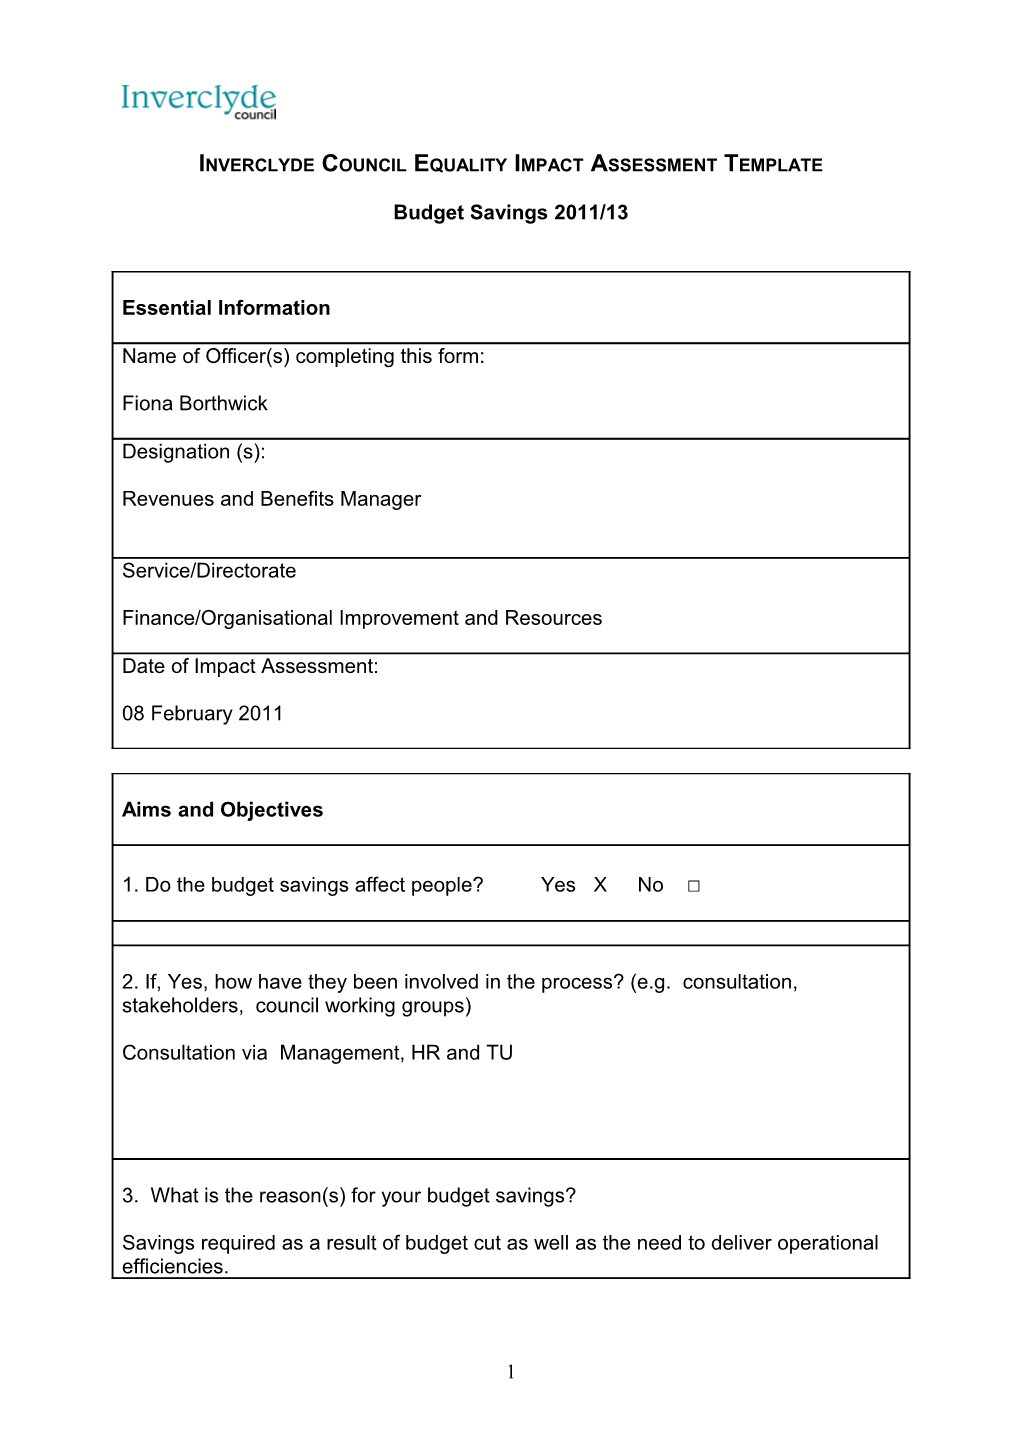 Inverclyde Council Equality Impact Assessment Template